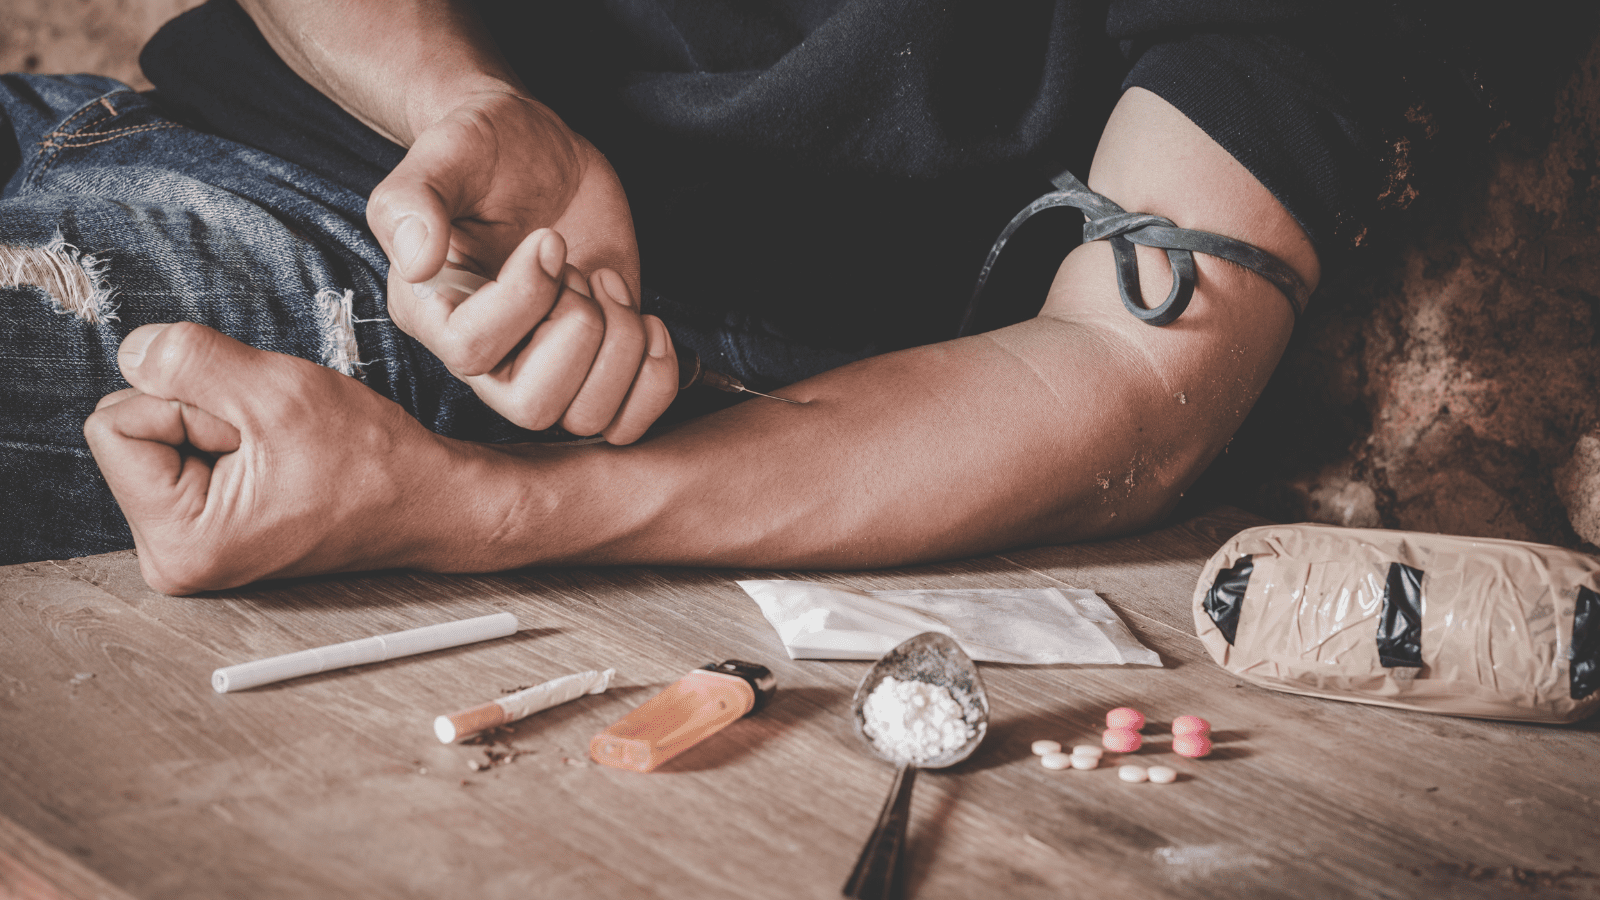 Man drugs addicted injecting heroin in his arm, Drug addict man with syringe using drugs, Drugs concept, 26 June, International Day Against Drug abuse.